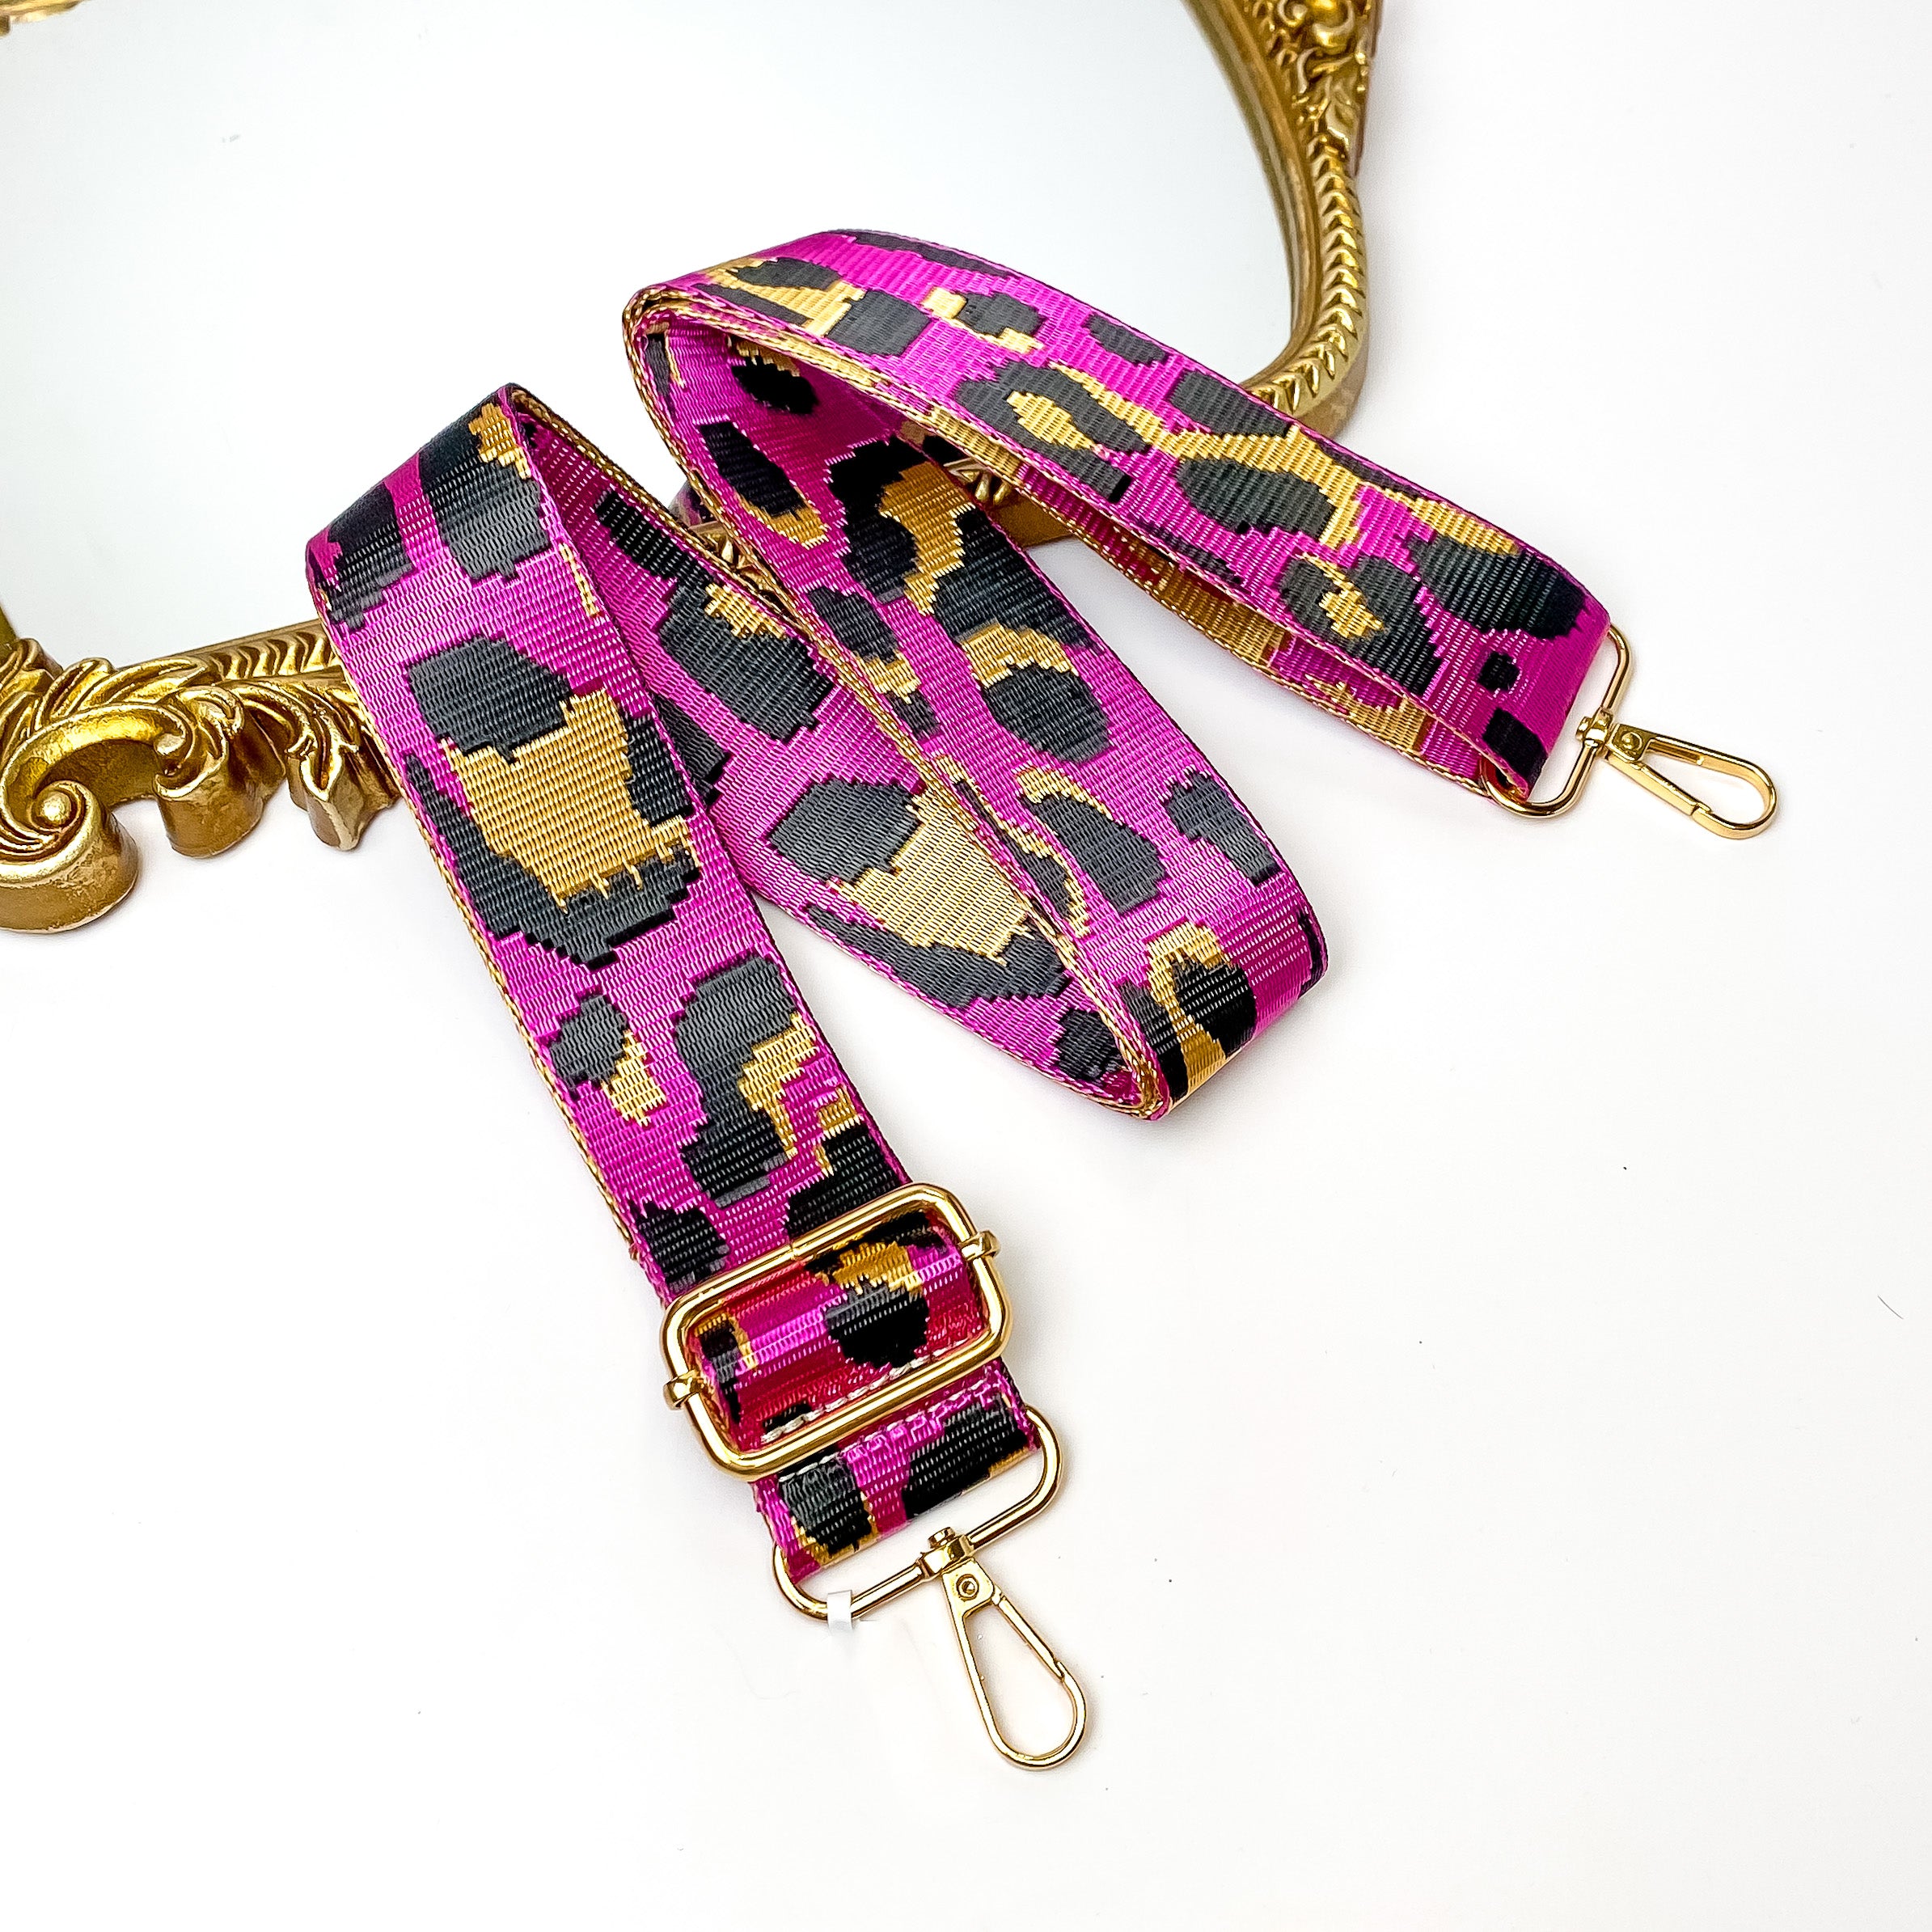 Shiny fuchsia pink purse strap with a tan and black leopard print. This purse strap includes gold accents. This purse strap is pictured partially on a gold mirror on a white background.